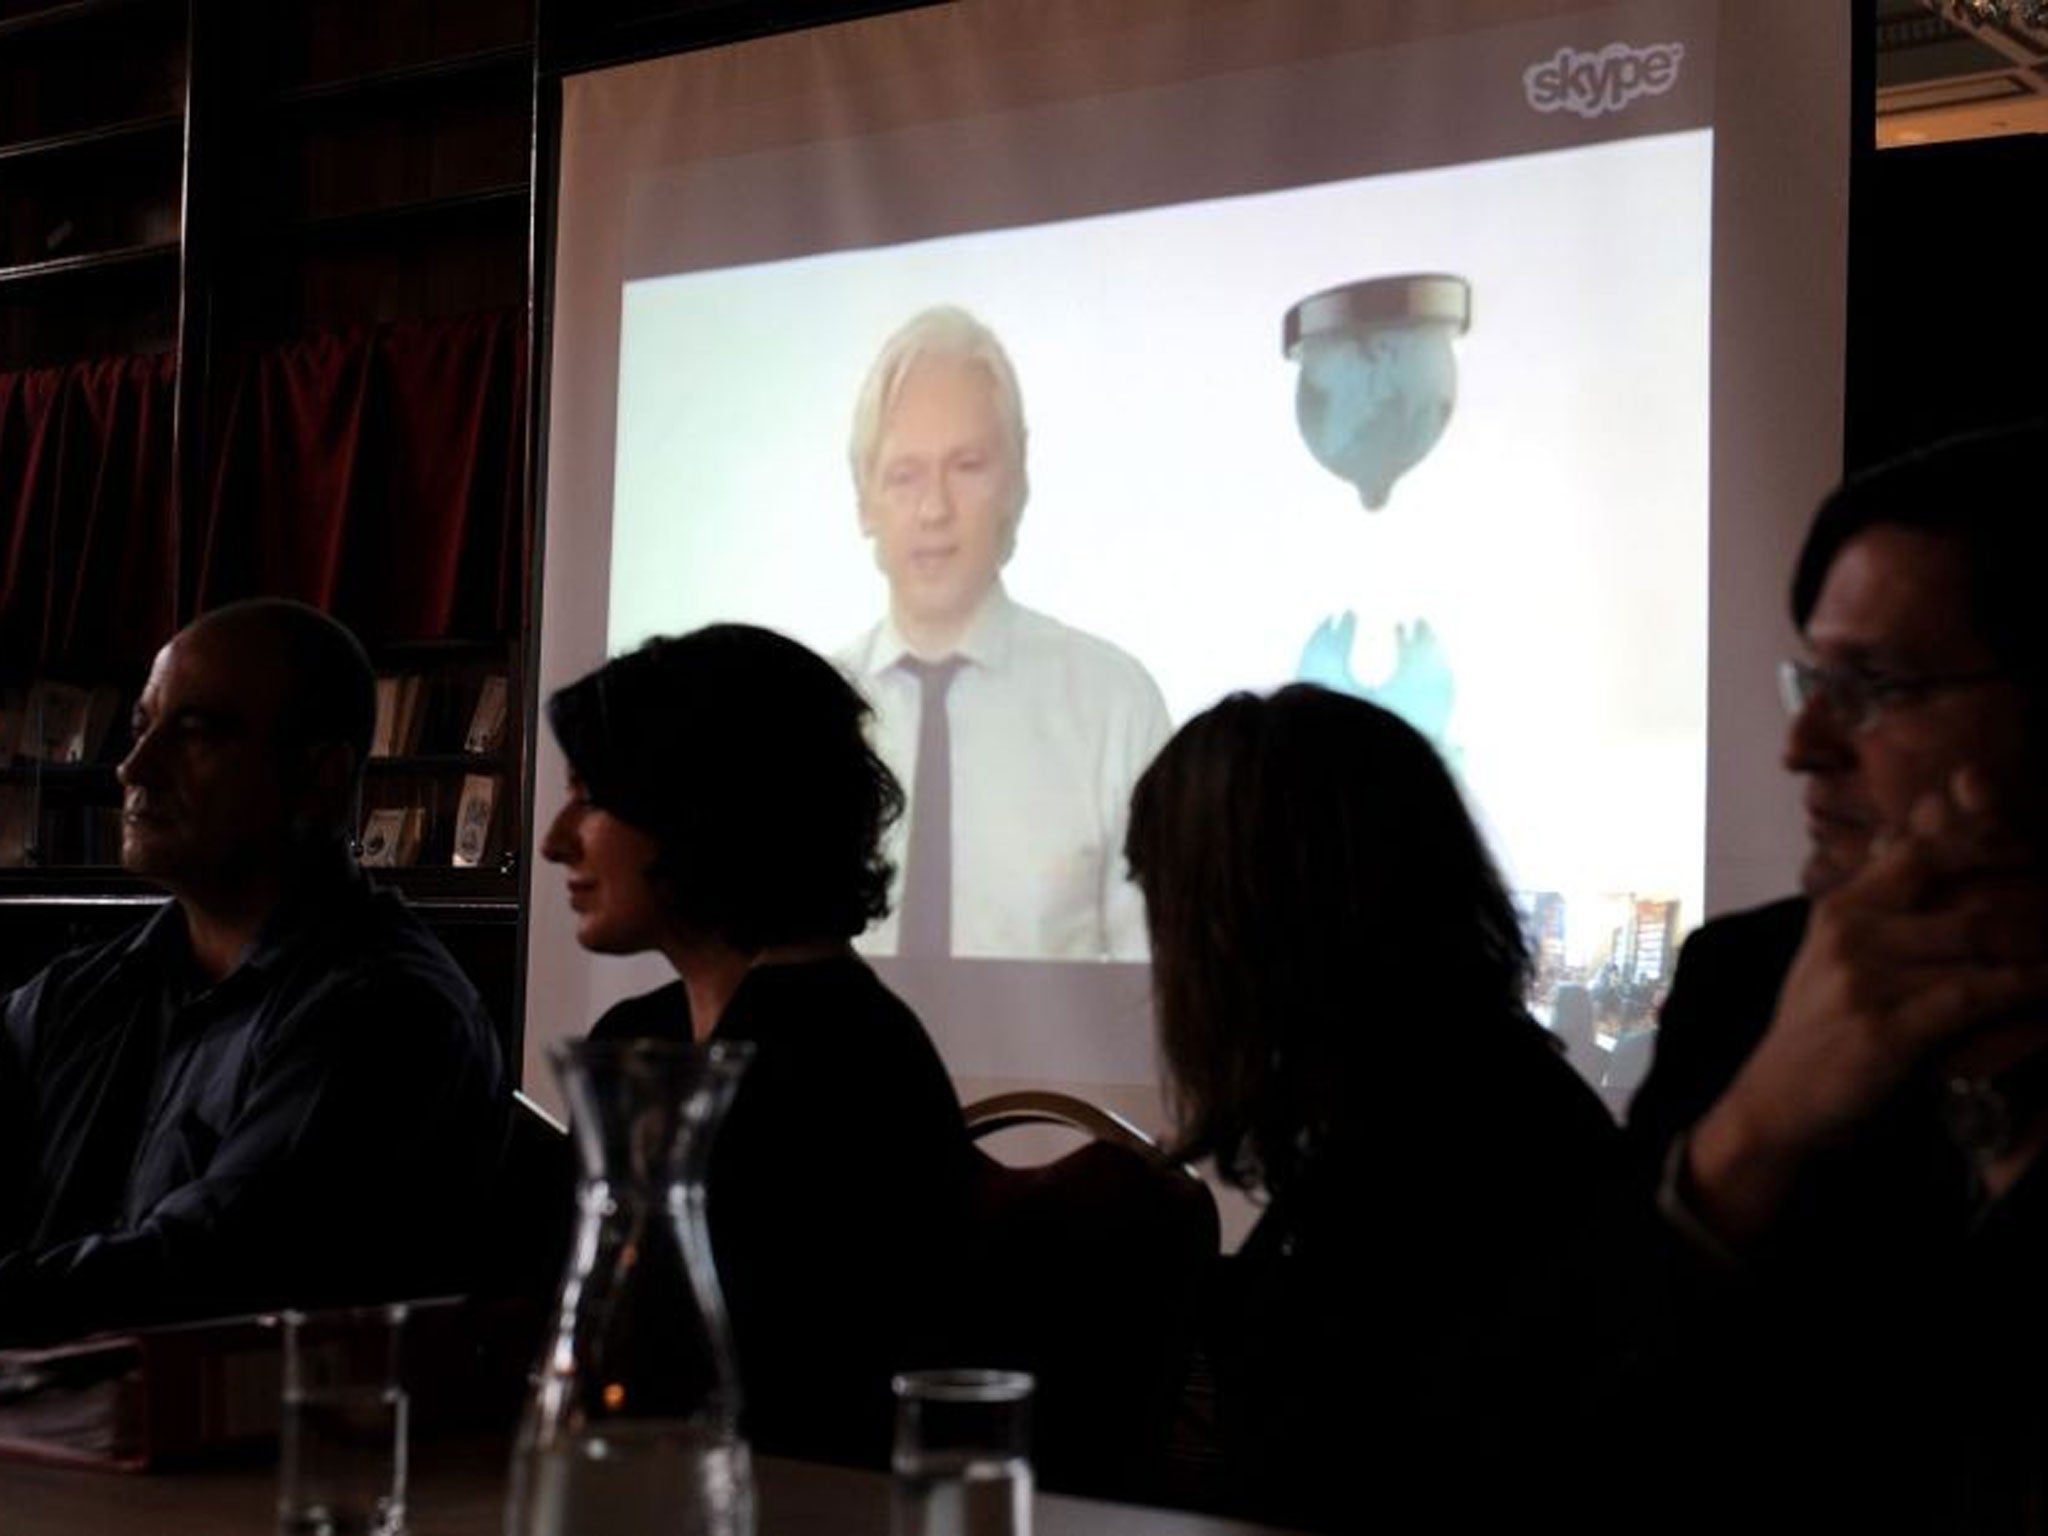 Wikileaks Party candidate Julian Assange speaks from London during the official launch and announcement of Senate candidates in Melbourne, Australia